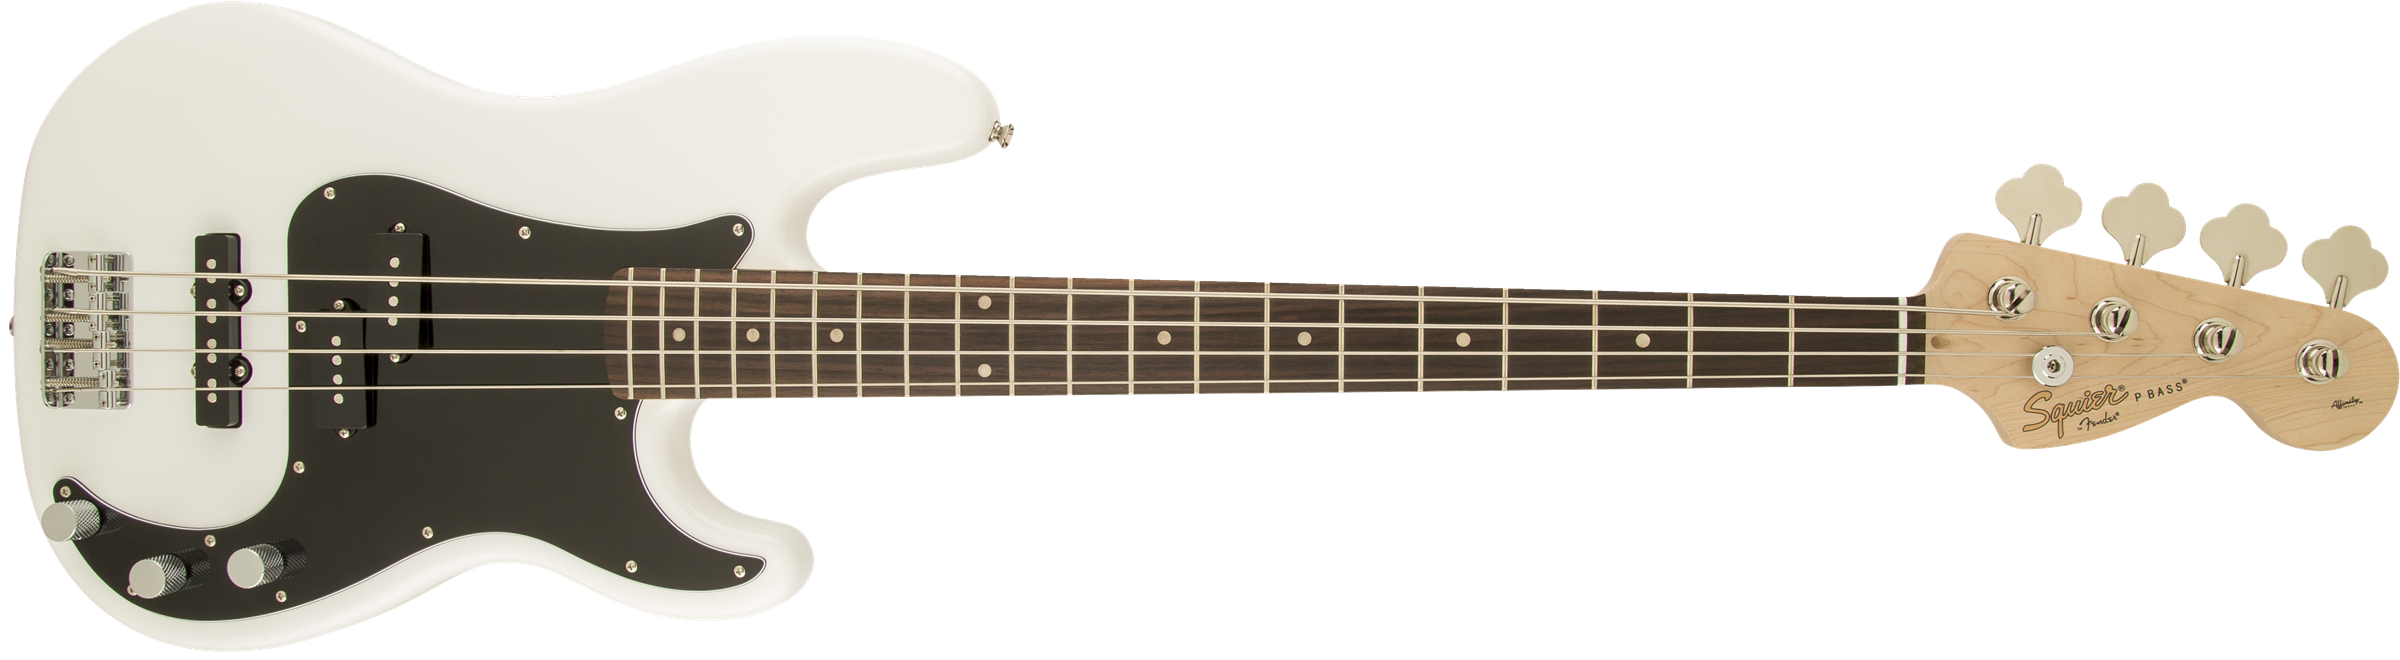 Squier Precision Bass Affinity Series Pj (lau) - Olympic White - Solid body elektrische bas - Variation 1